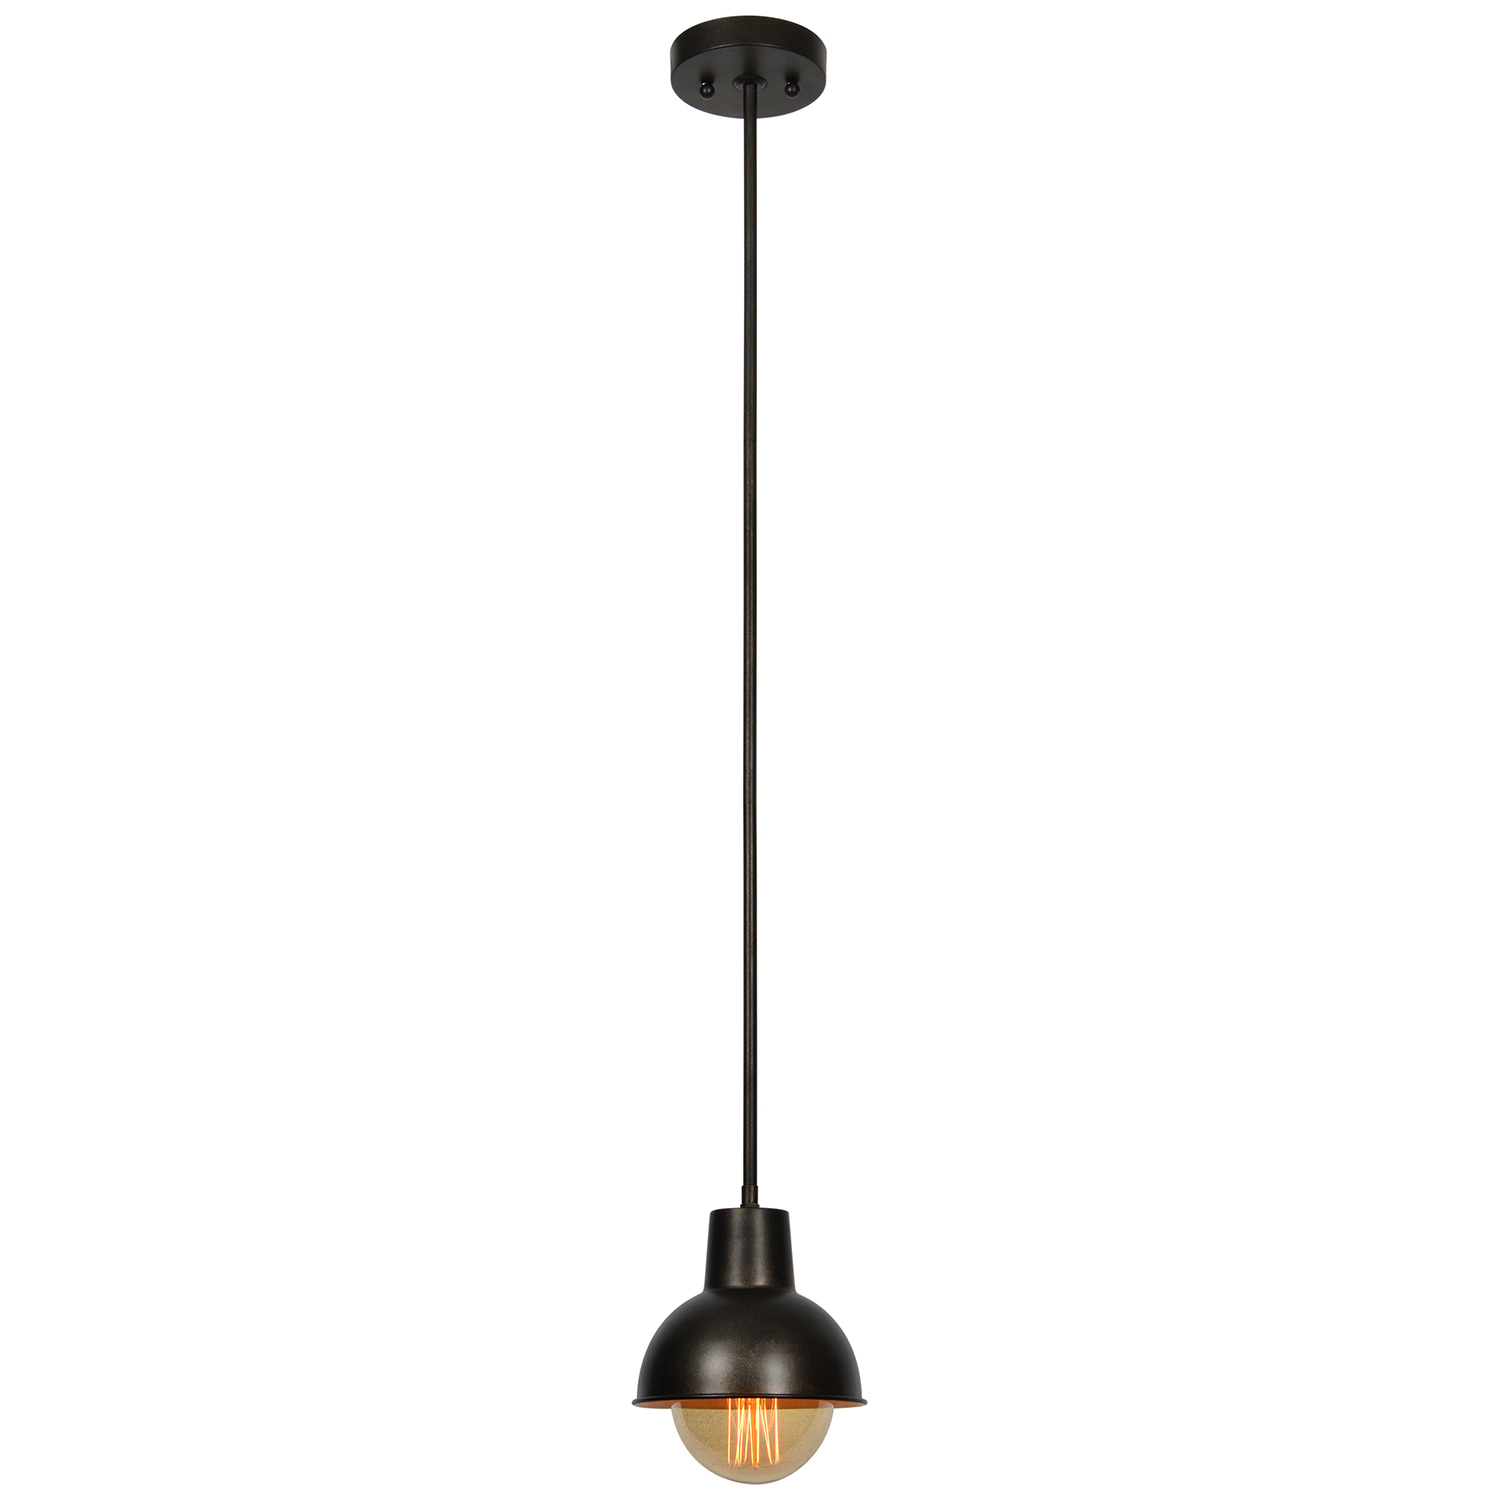 Ren-Wil Syne Ceiling Fixture - Graphite